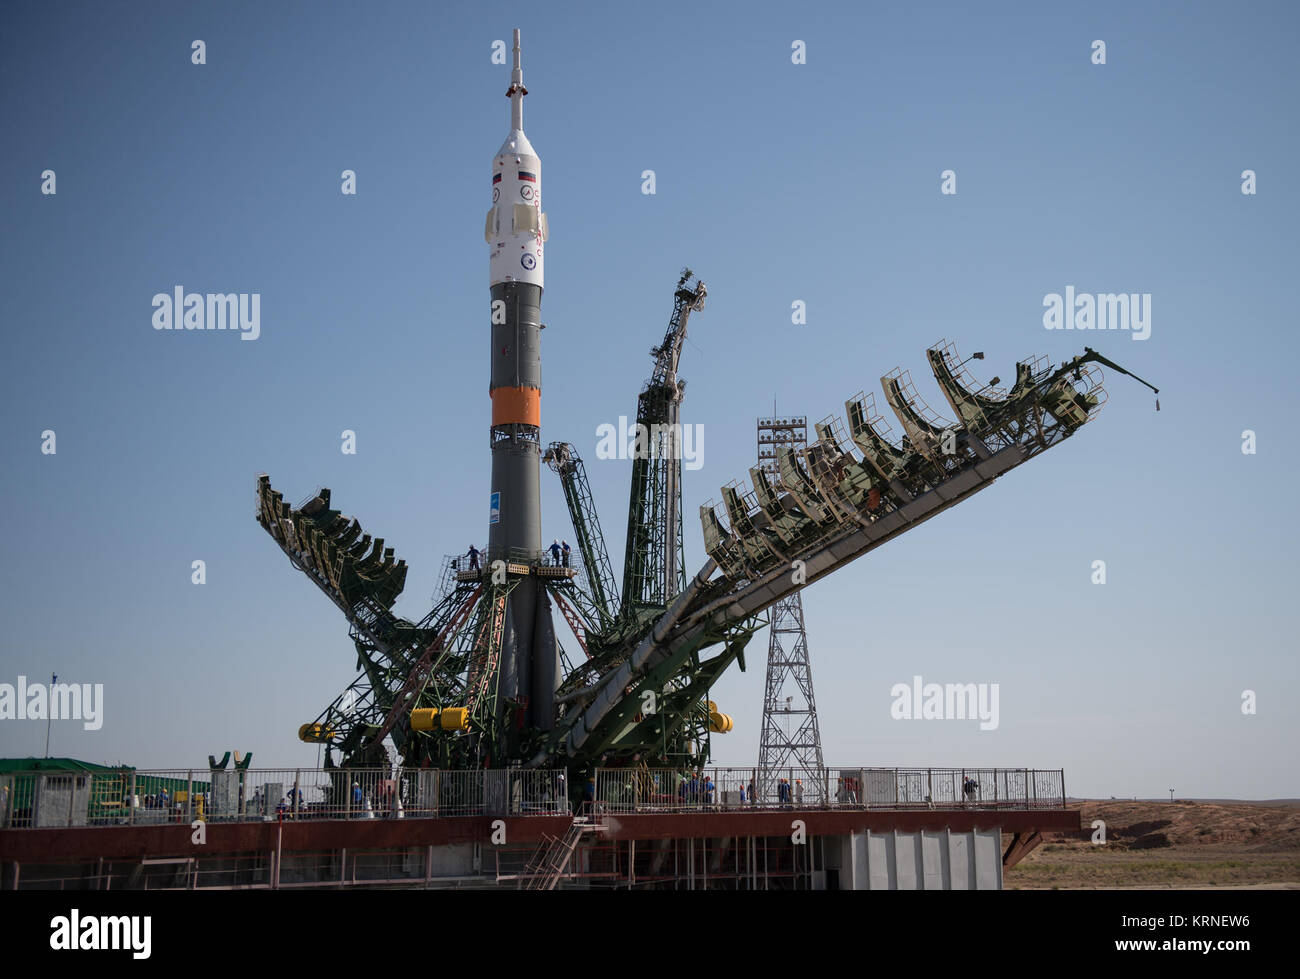 The Soyuz MS-05 spacecraft is seen as the service structure arms begin to close on the launch pad at the Baikonur Cosmodrome, Kazakhstan, Wednesday, July 26, 2017.  Expedition 52 flight engineer Sergei Ryazanskiy of Roscosmos, flight engineer Randy Bresnik of NASA, and flight engineer Paolo Nespoli of ESA (European Space Agency), are scheduled to launch to the International Space Station aboard the Soyuz spacecraft from the Baikonur Cosmodrome on July 28.  Photo Credit: (NASA/Joel Kowsky) Expedition 52 Rollout (NHQ201707260031) Stock Photo